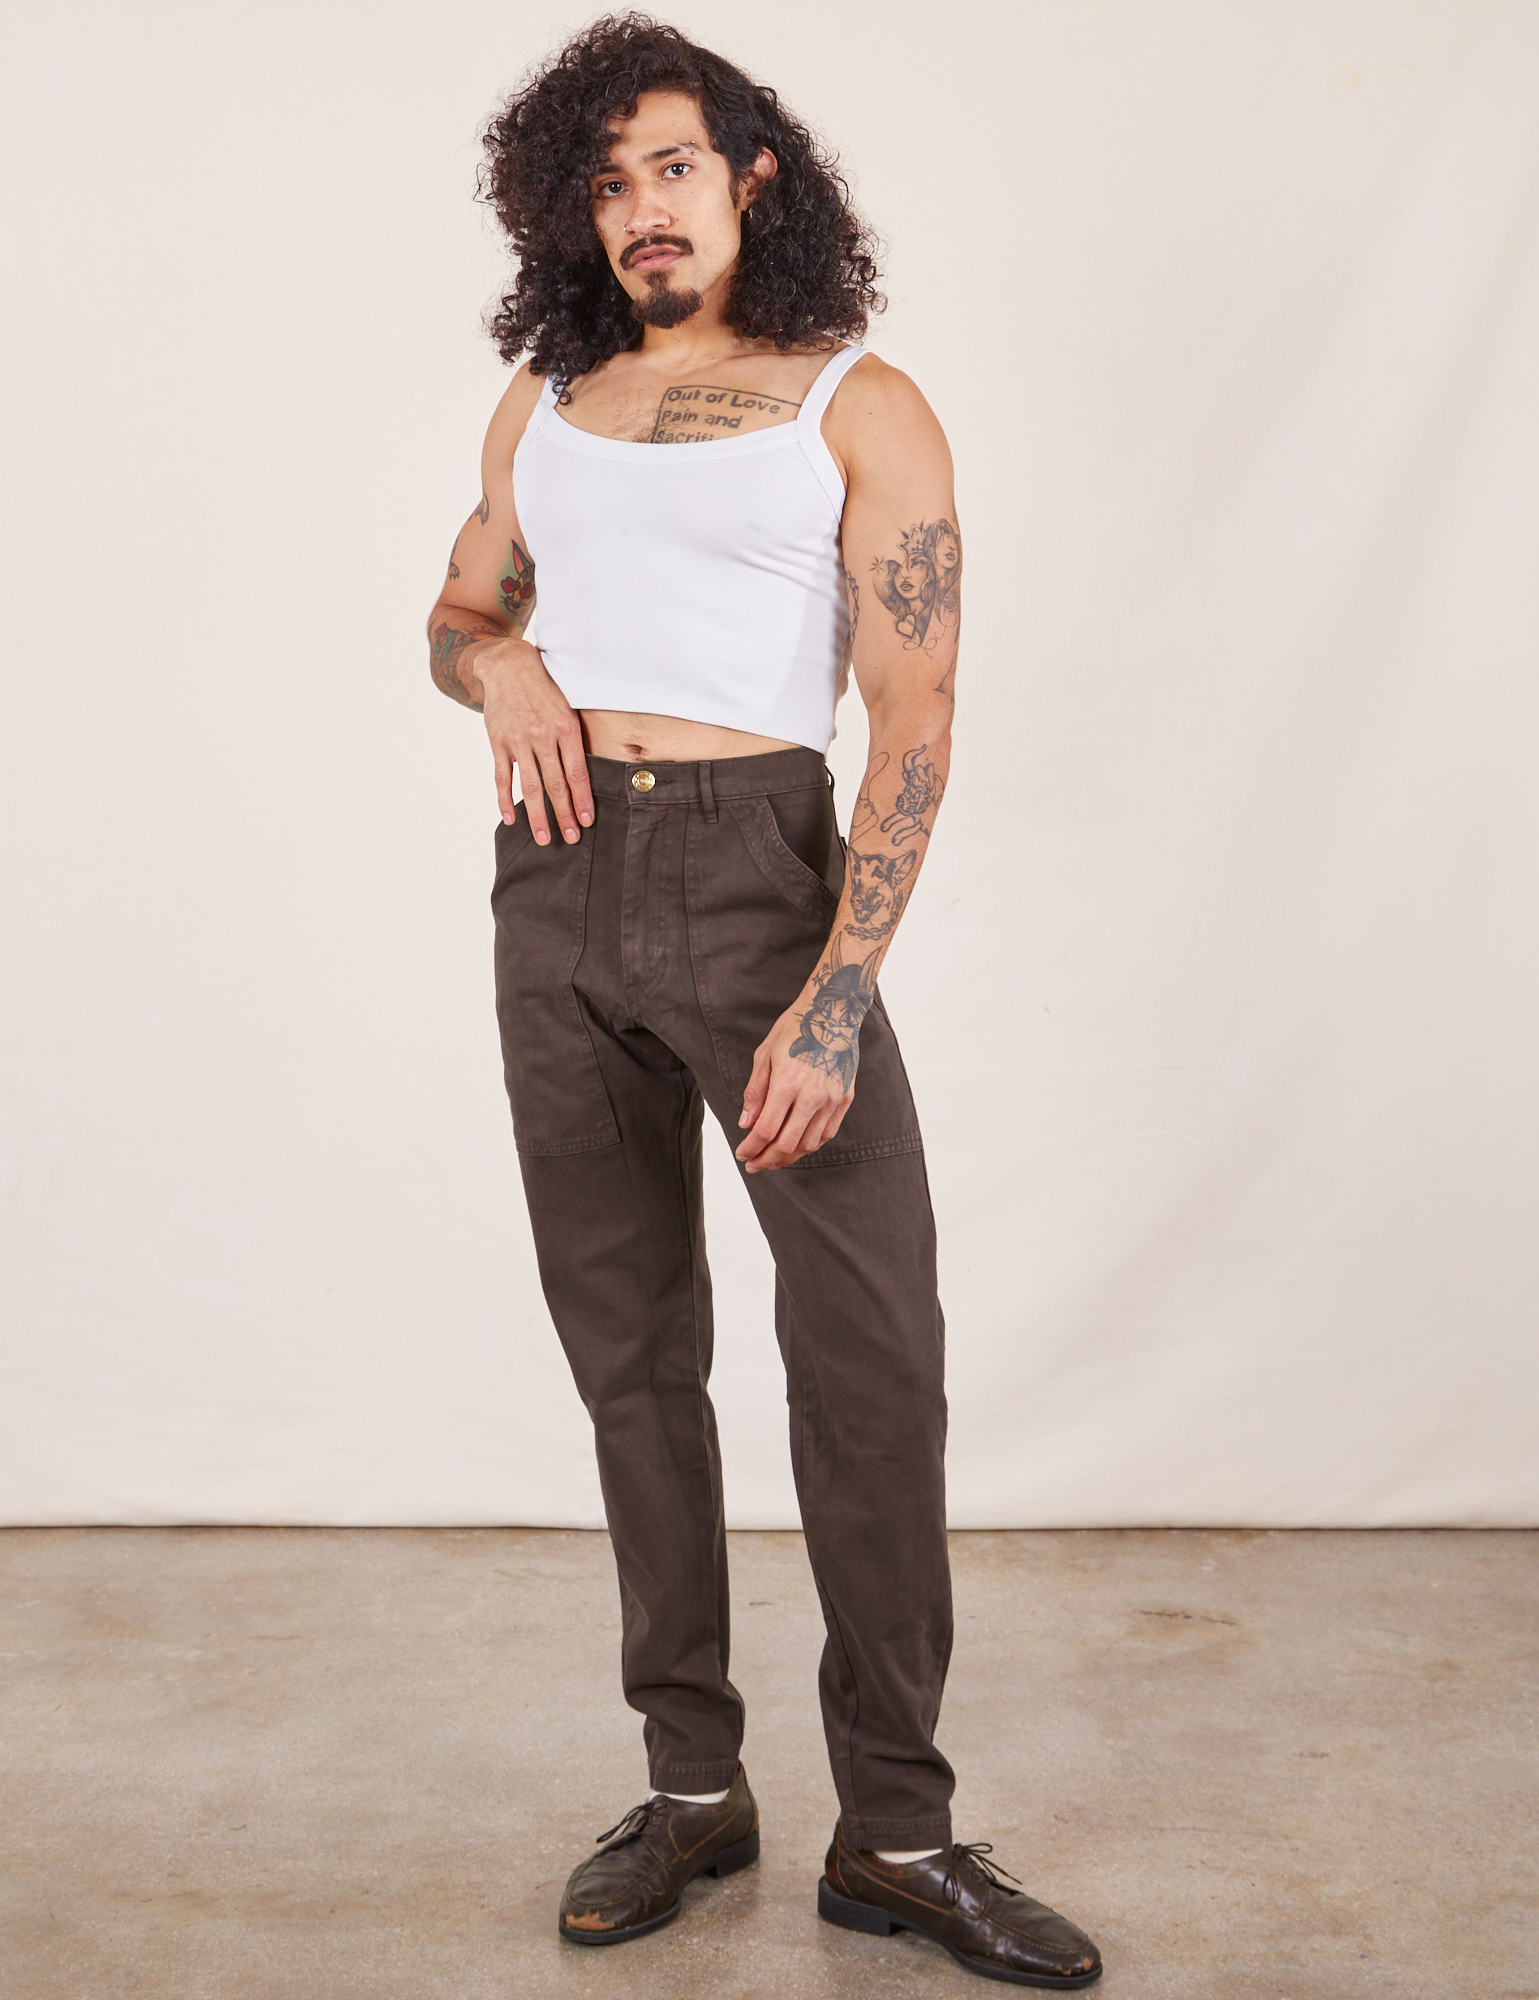 Jesse is wearing Pencil Pants in Espresso Brown and vintage off-white Cami